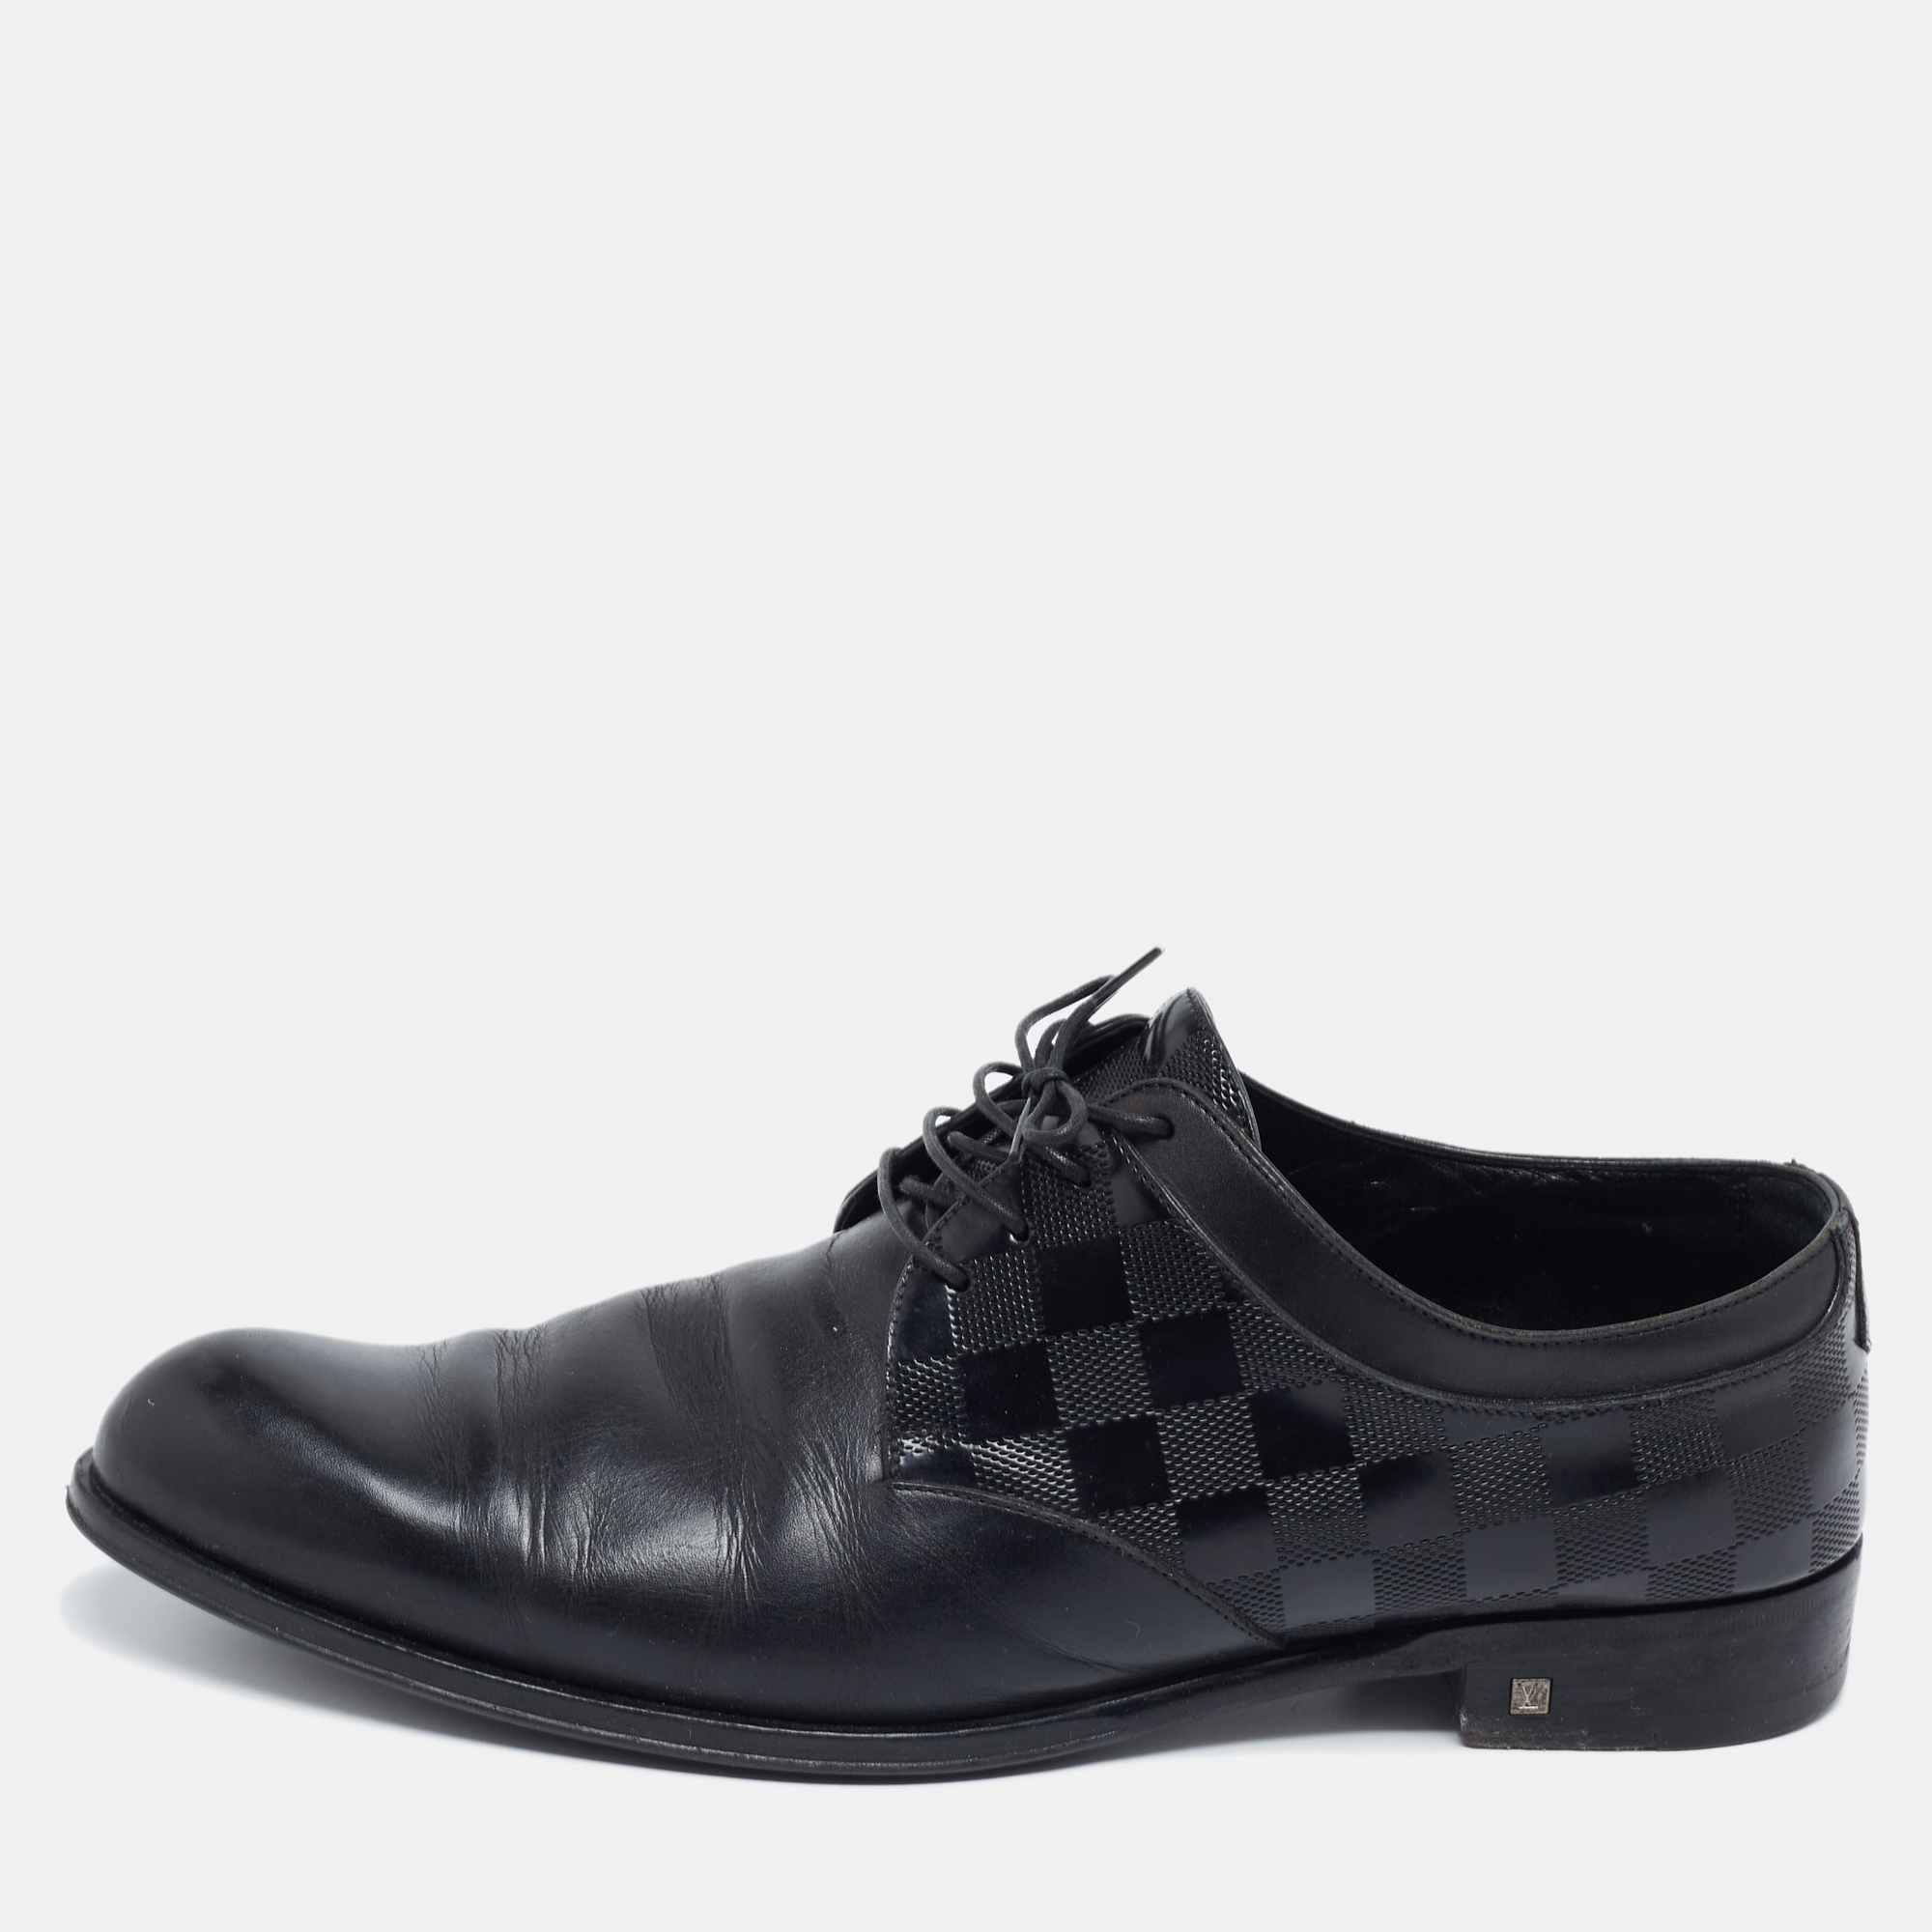 

Louis Vuitton Black Damier Embossed Leather Lace-Up Derby Size 43